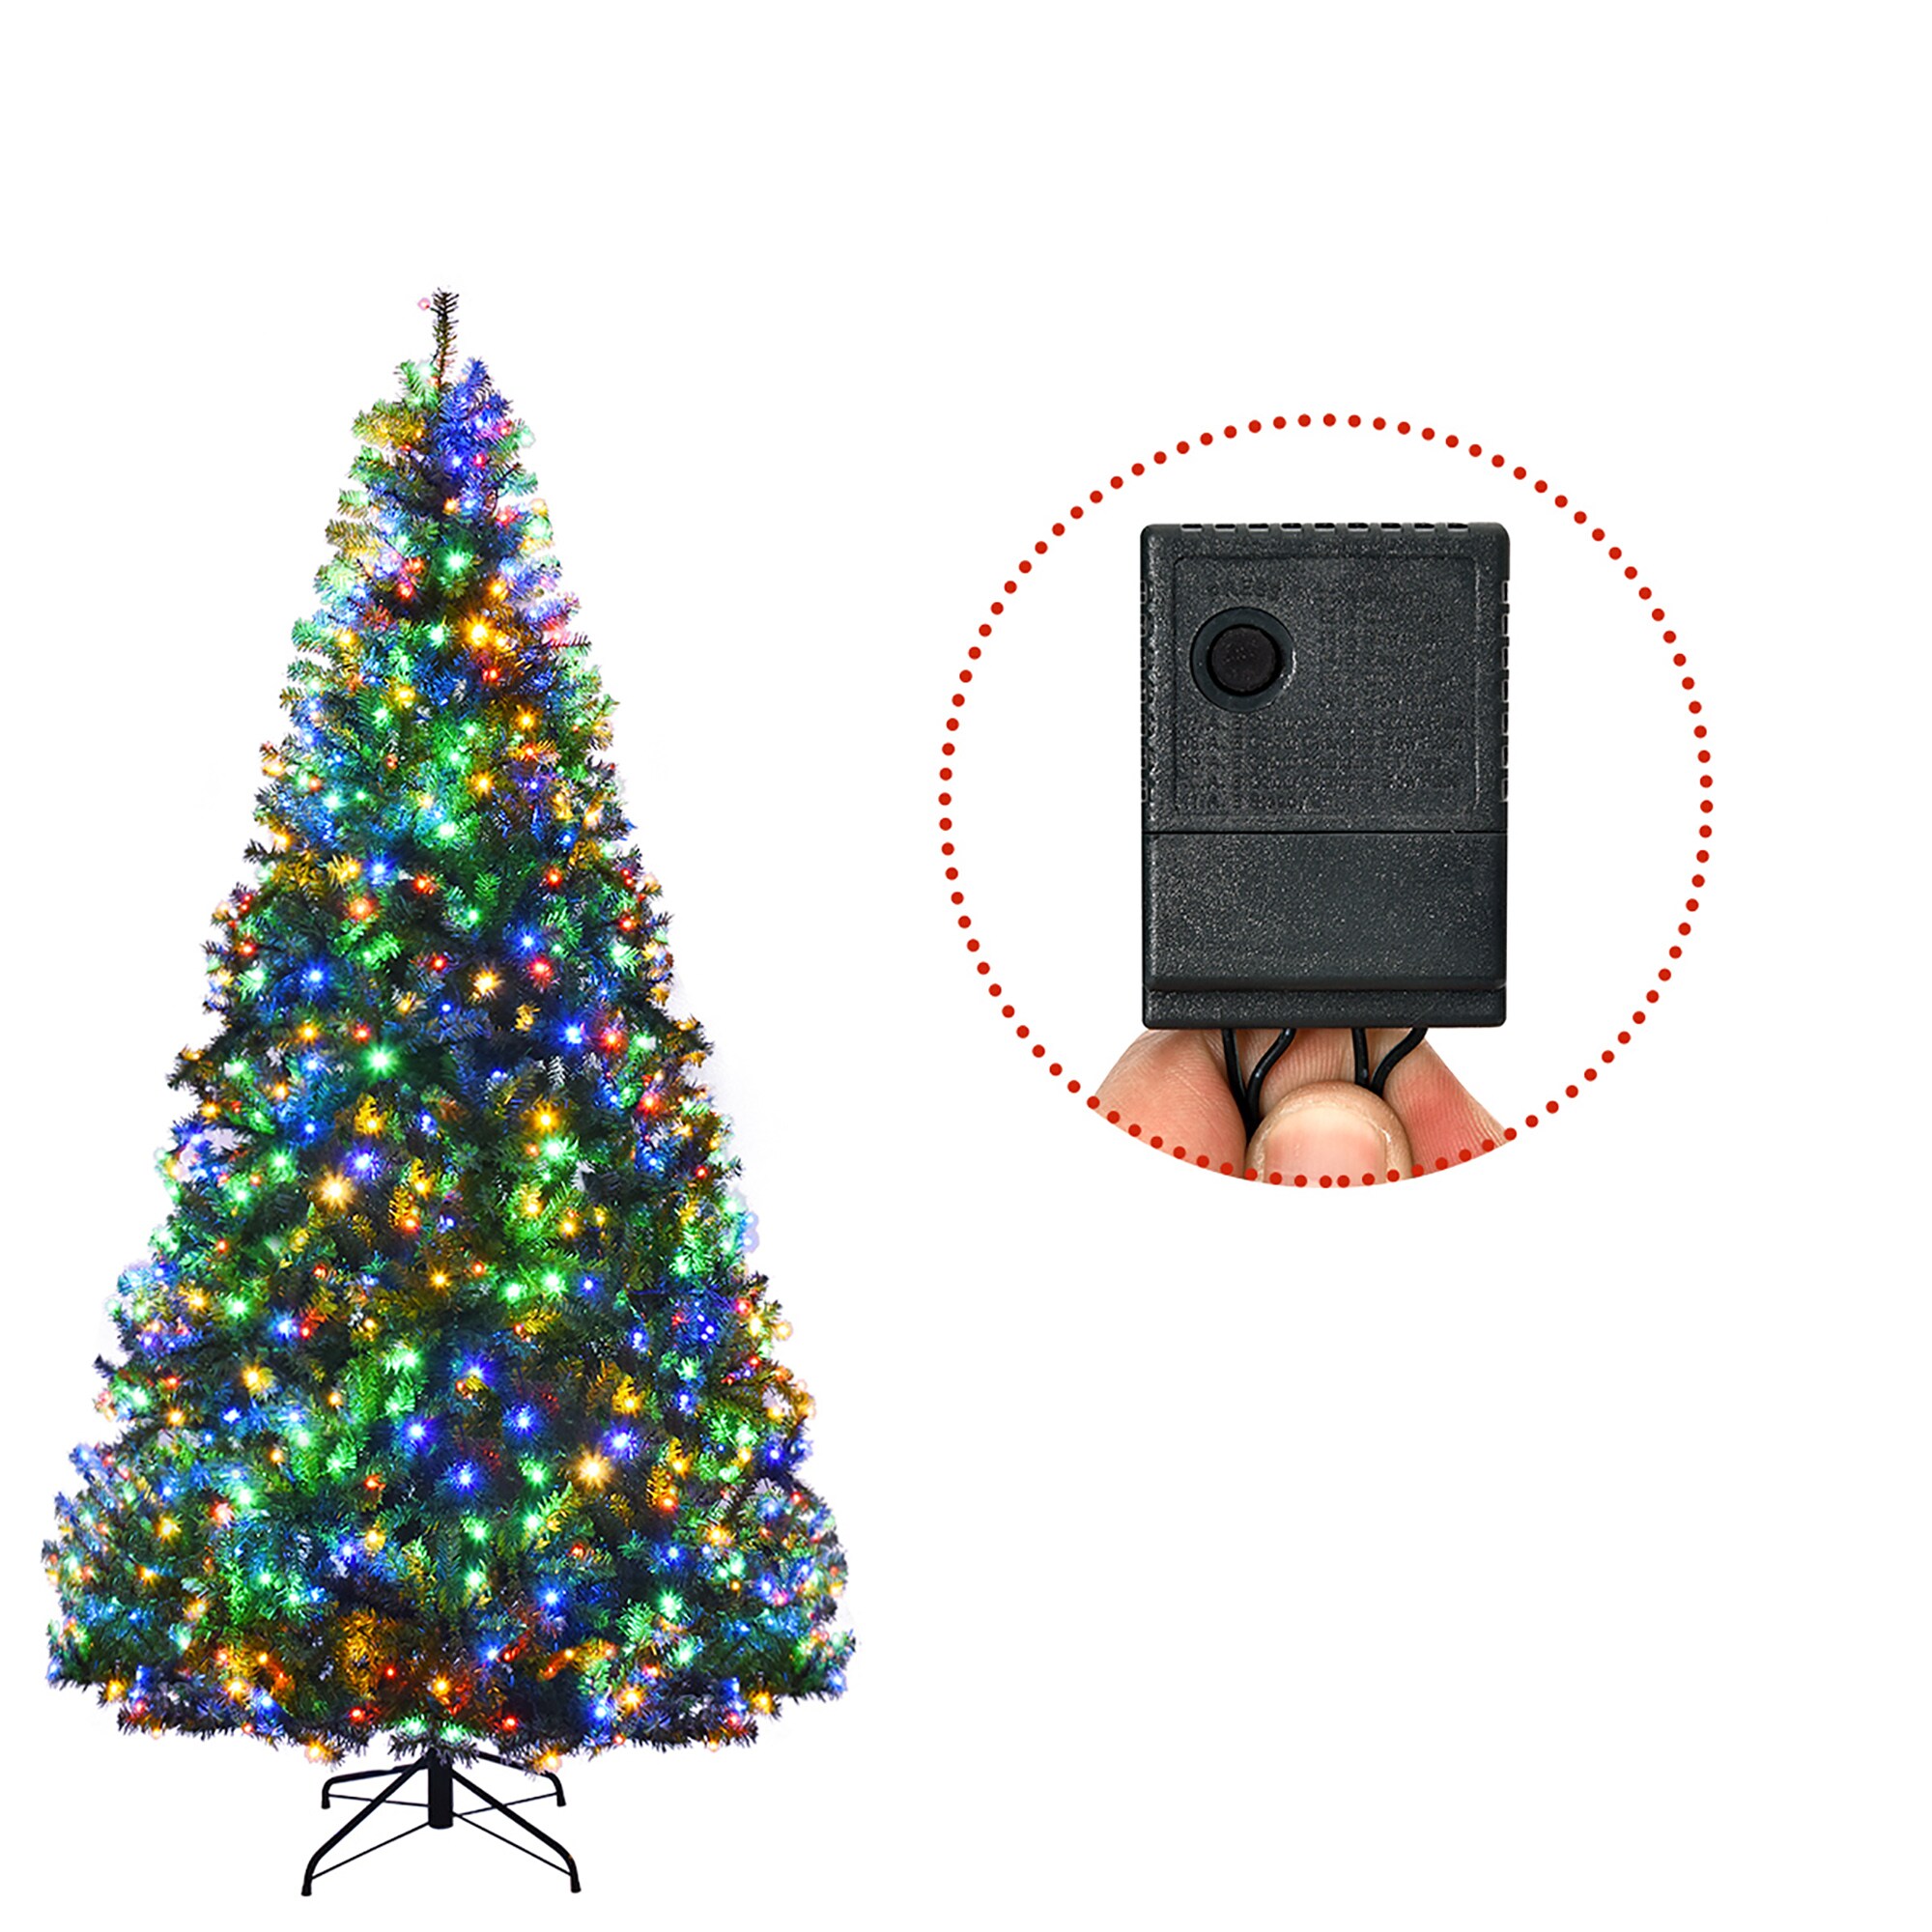 Goplus 9-ft Pre-lit Artificial Christmas Tree with LED Lights in